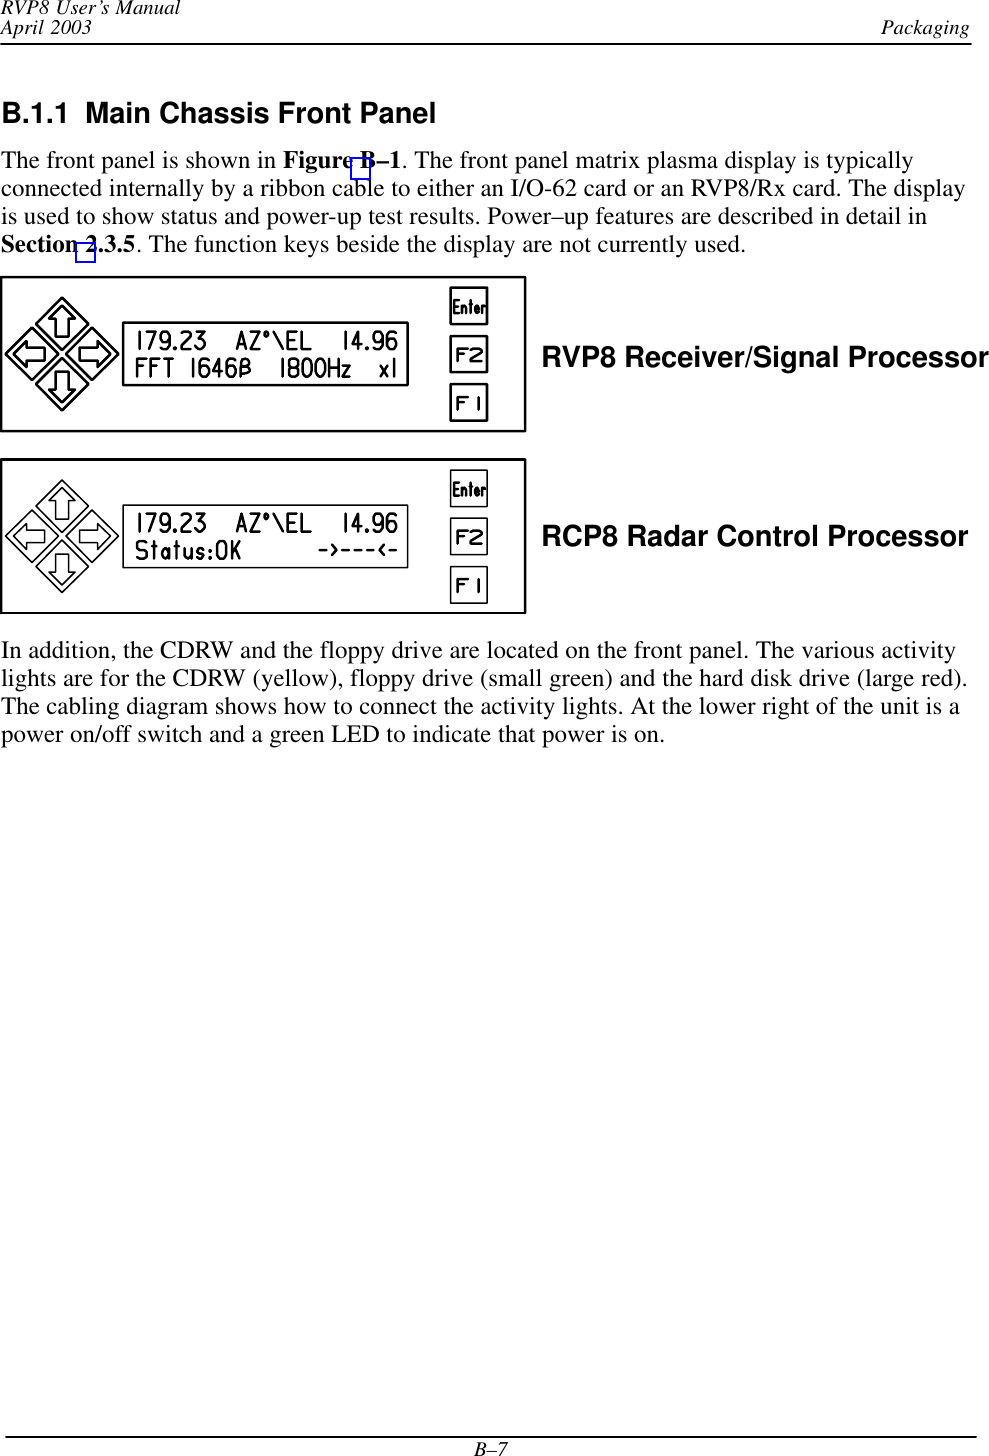 PackagingRVP8 User’s ManualApril 2003B–7B.1.1  Main Chassis Front PanelThe front panel is shown in Figure B–1. The front panel matrix plasma display is typicallyconnected internally by a ribbon cable to either an I/O-62 card or an RVP8/Rx card. The displayis used to show status and power-up test results. Power–up features are described in detail inSection 2.3.5. The function keys beside the display are not currently used.RVP8 Receiver/Signal ProcessorRCP8 Radar Control ProcessorIn addition, the CDRW and the floppy drive are located on the front panel. The various activitylights are for the CDRW (yellow), floppy drive (small green) and the hard disk drive (large red).The cabling diagram shows how to connect the activity lights. At the lower right of the unit is apower on/off switch and a green LED to indicate that power is on.